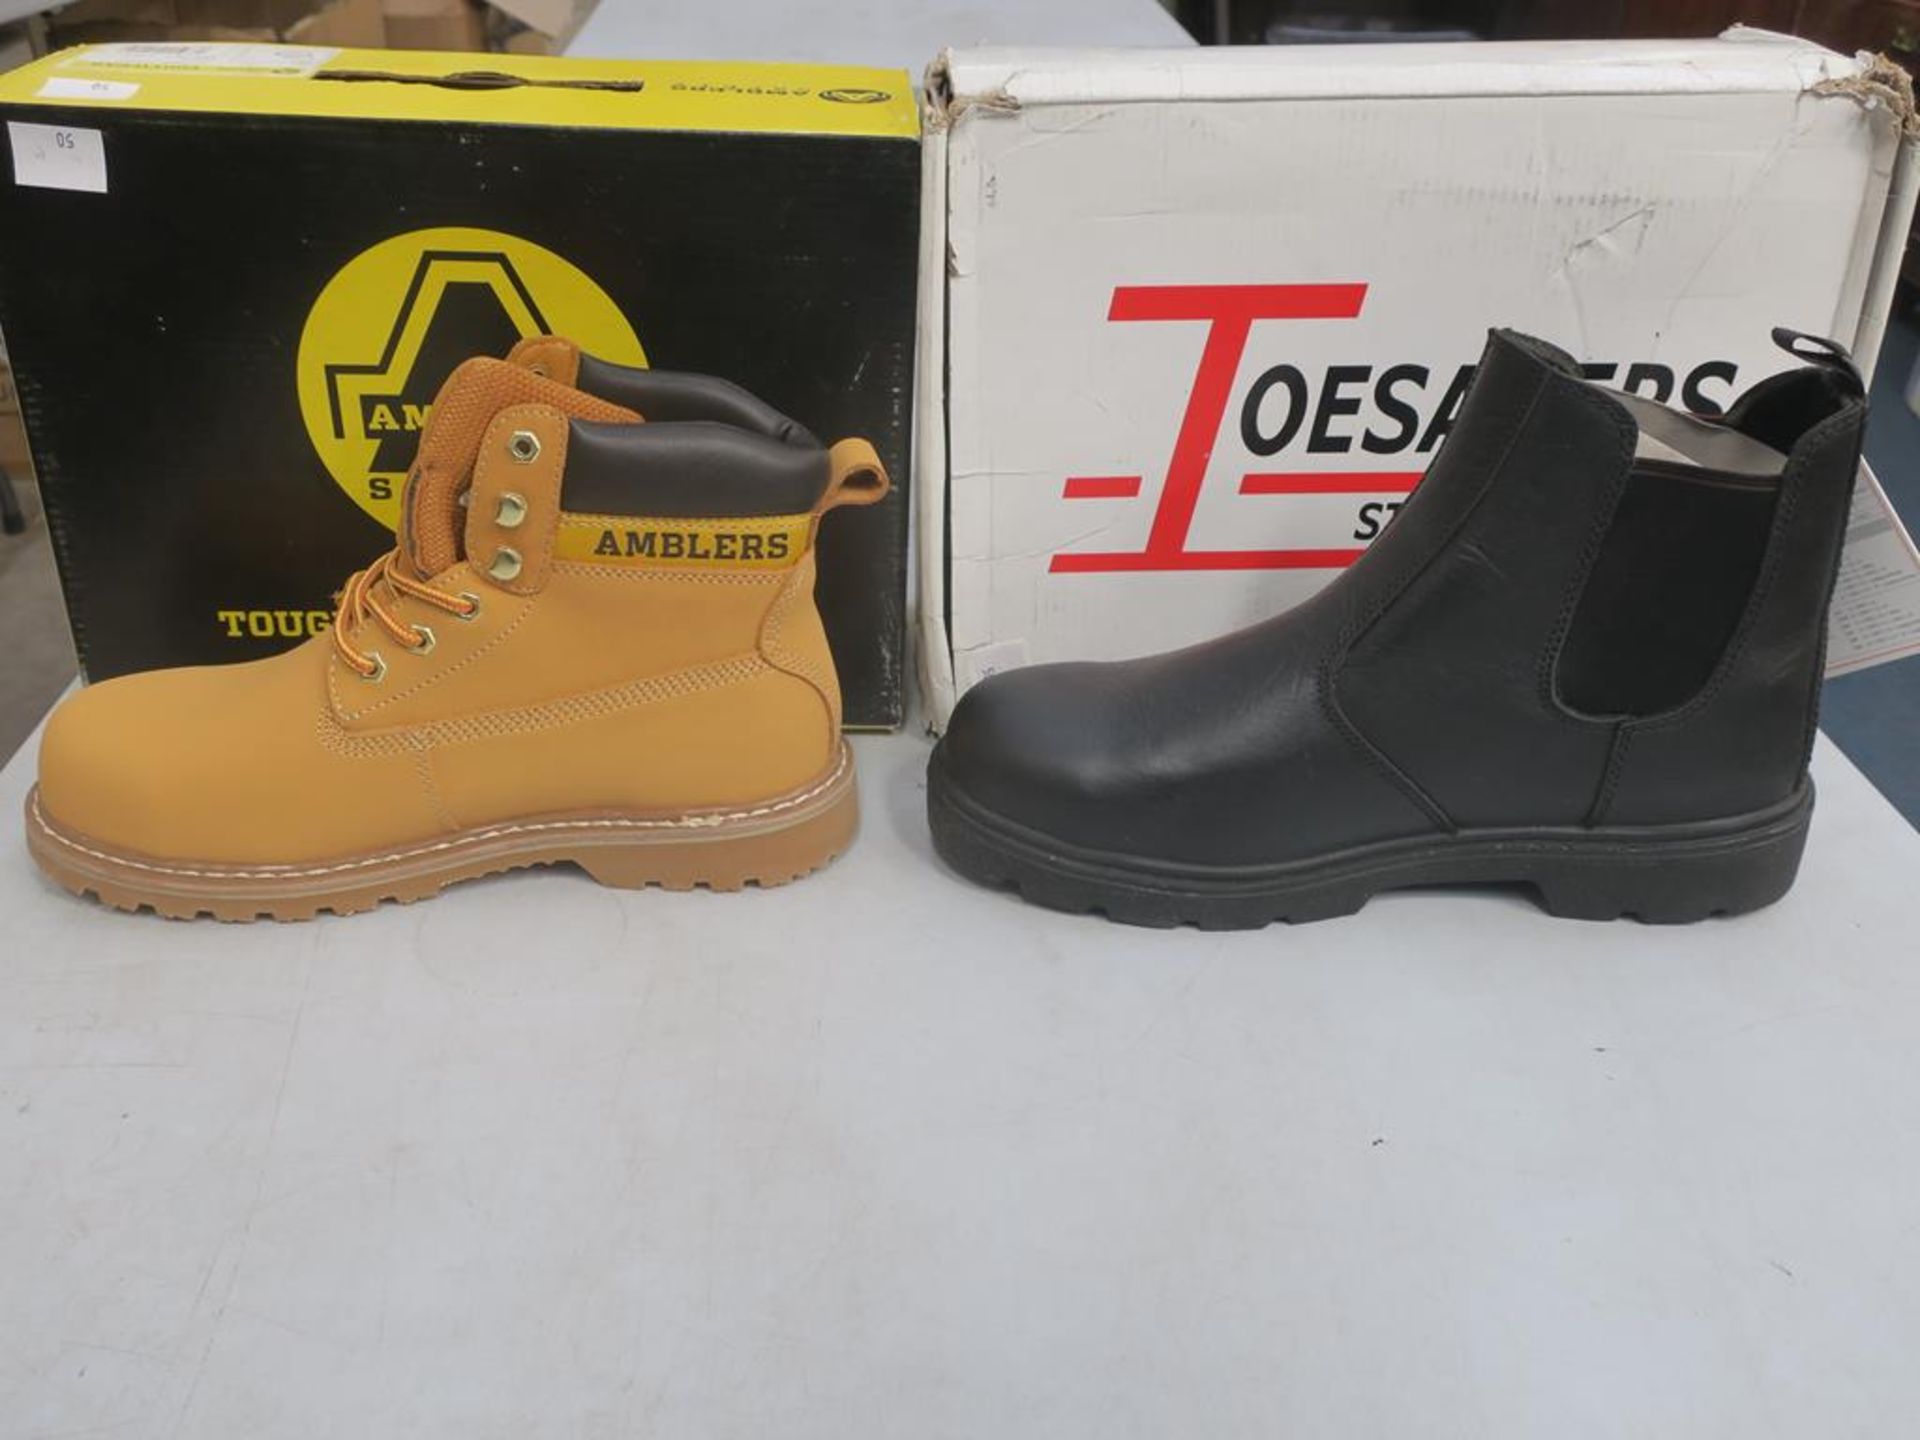 * Two pairs of New/Boxed Safety Boots. Amblers Safety Footwear FS7 in Honey colour size 7. ToeSavers - Image 2 of 3